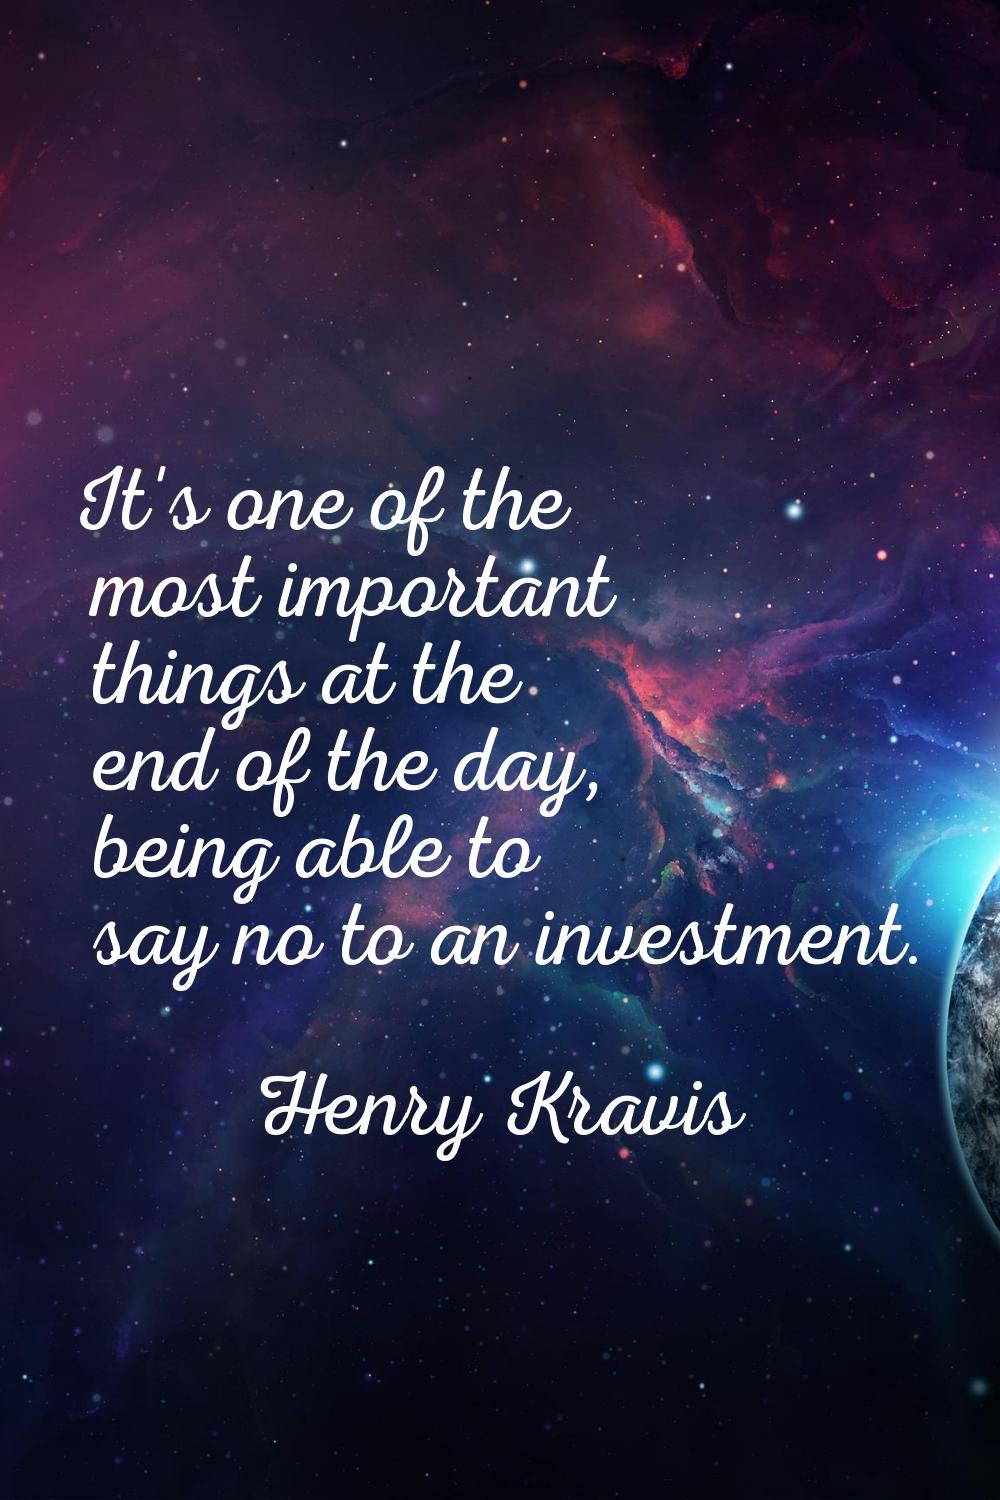 It's one of the most important things at the end of the day, being able to say no to an investment.